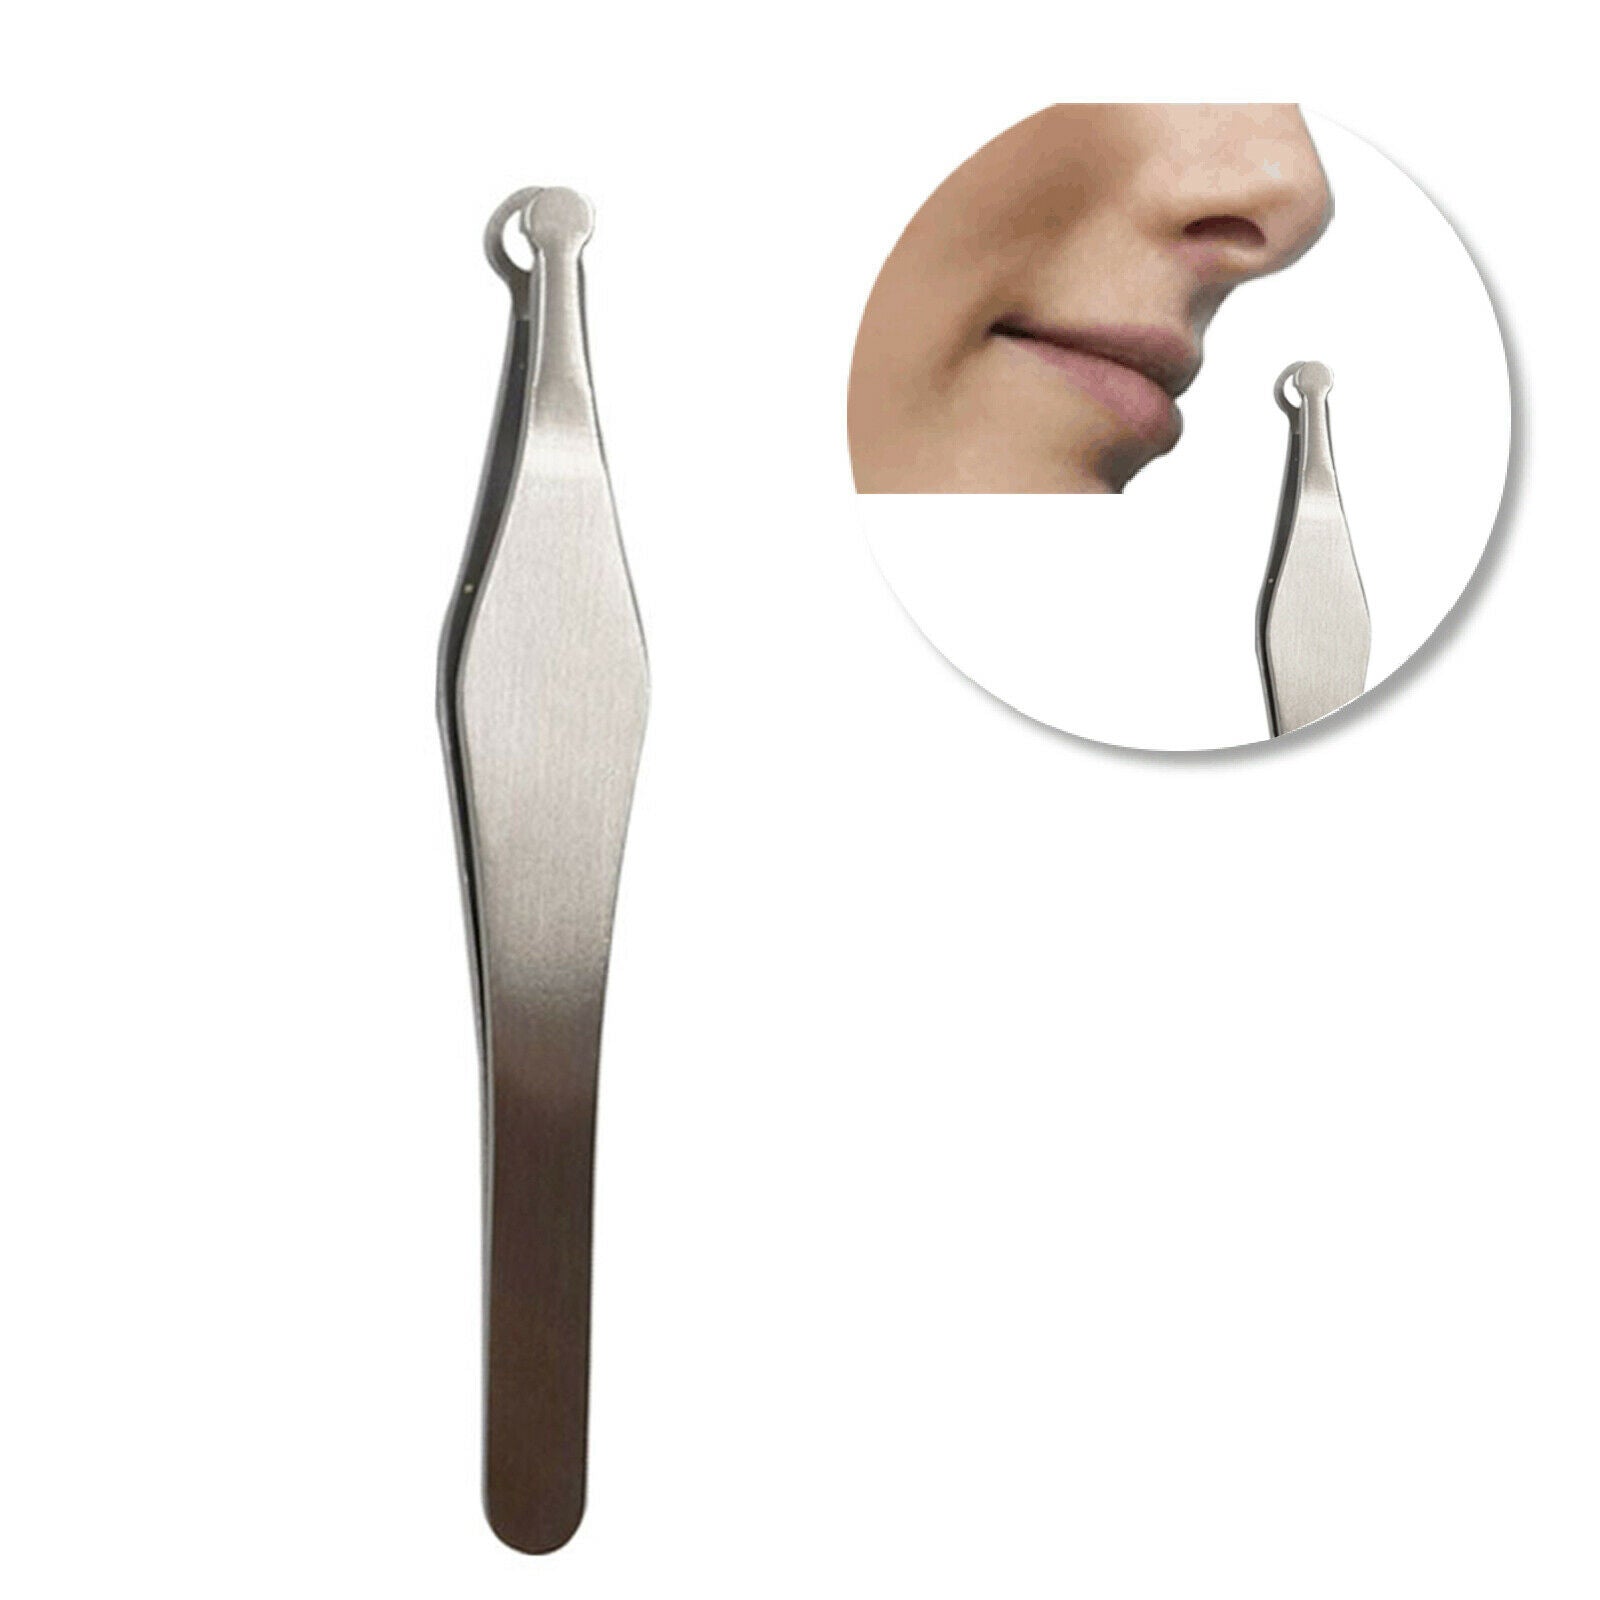 Nose Hair Trimming Tweezers Trimmer Grooming Rounded Tip Safe for Men Women